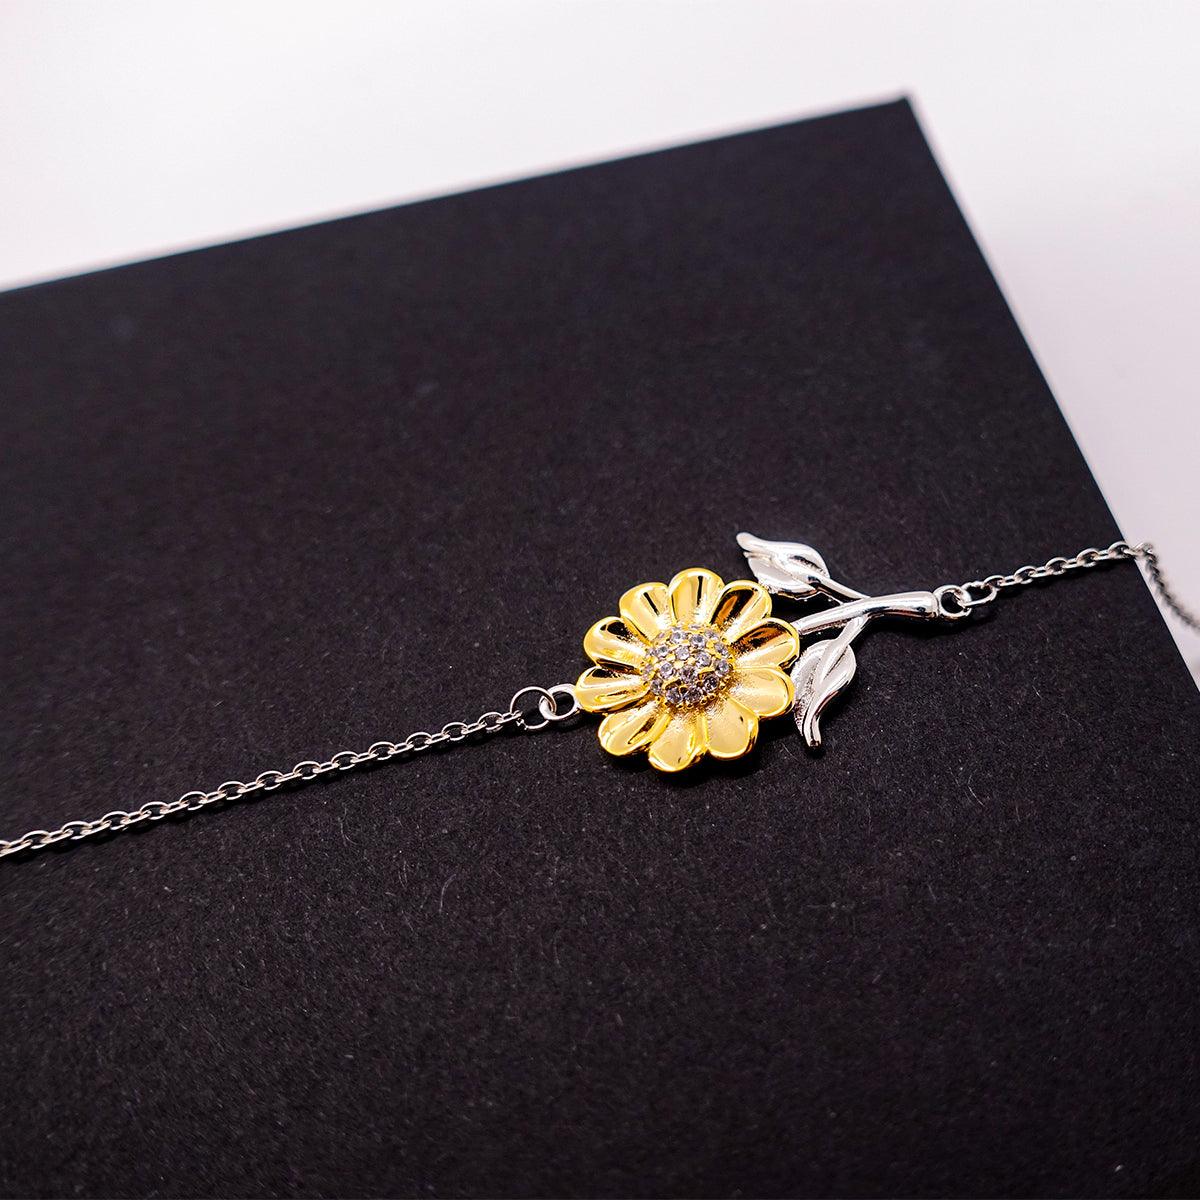 Parole Officer Sunflower Bracelet - Thanks for being who you are - Birthday Christmas Jewelry Gifts Coworkers Colleague Boss - Mallard Moon Gift Shop